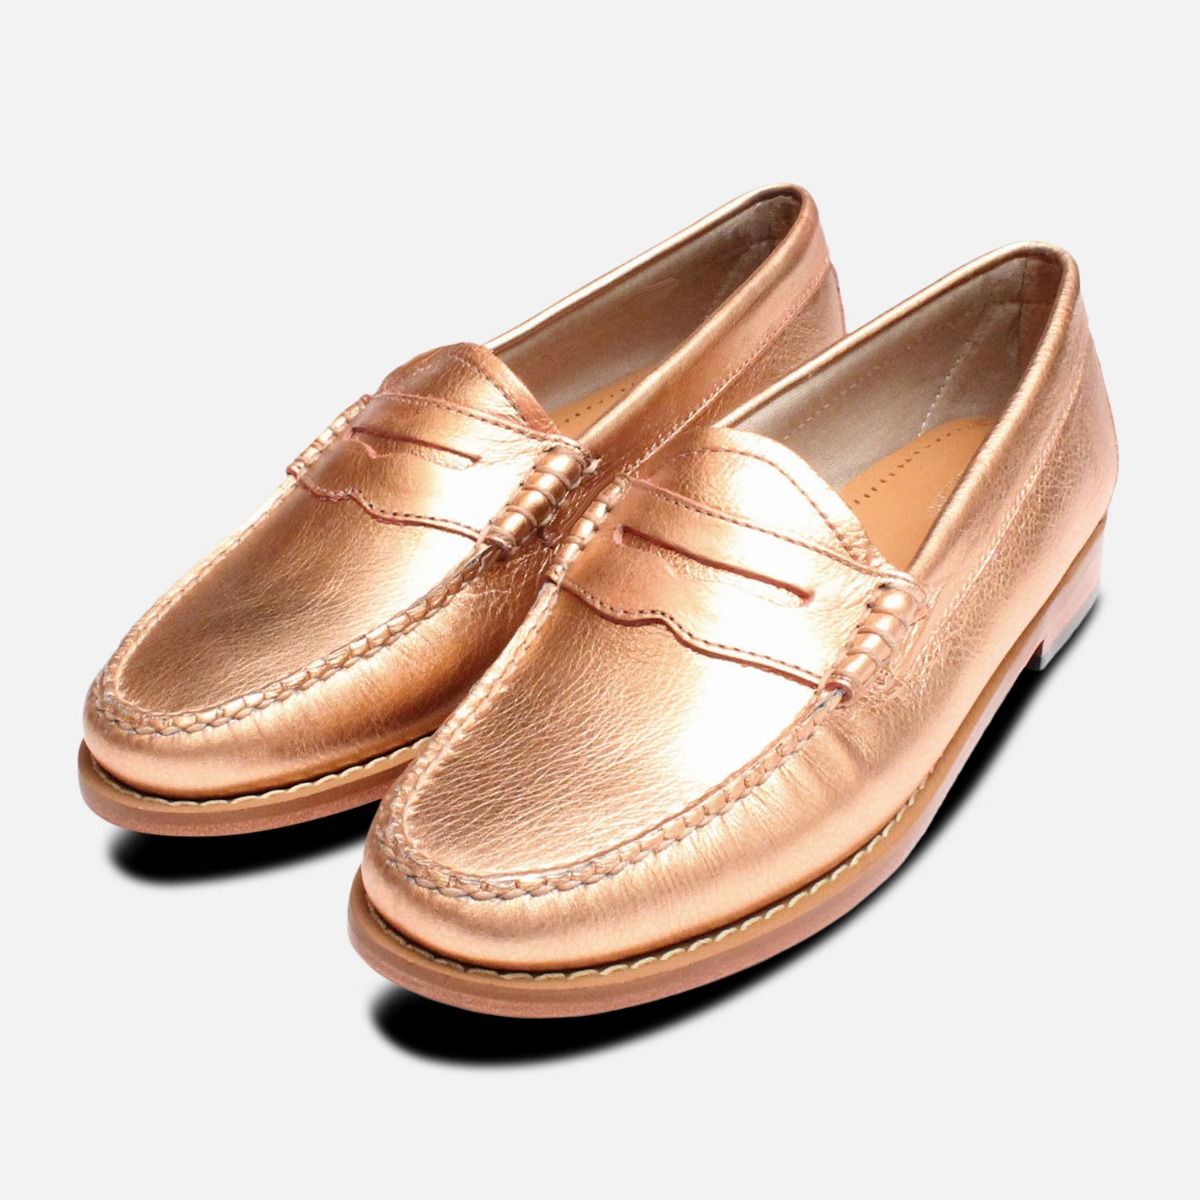 penny loafer slippers